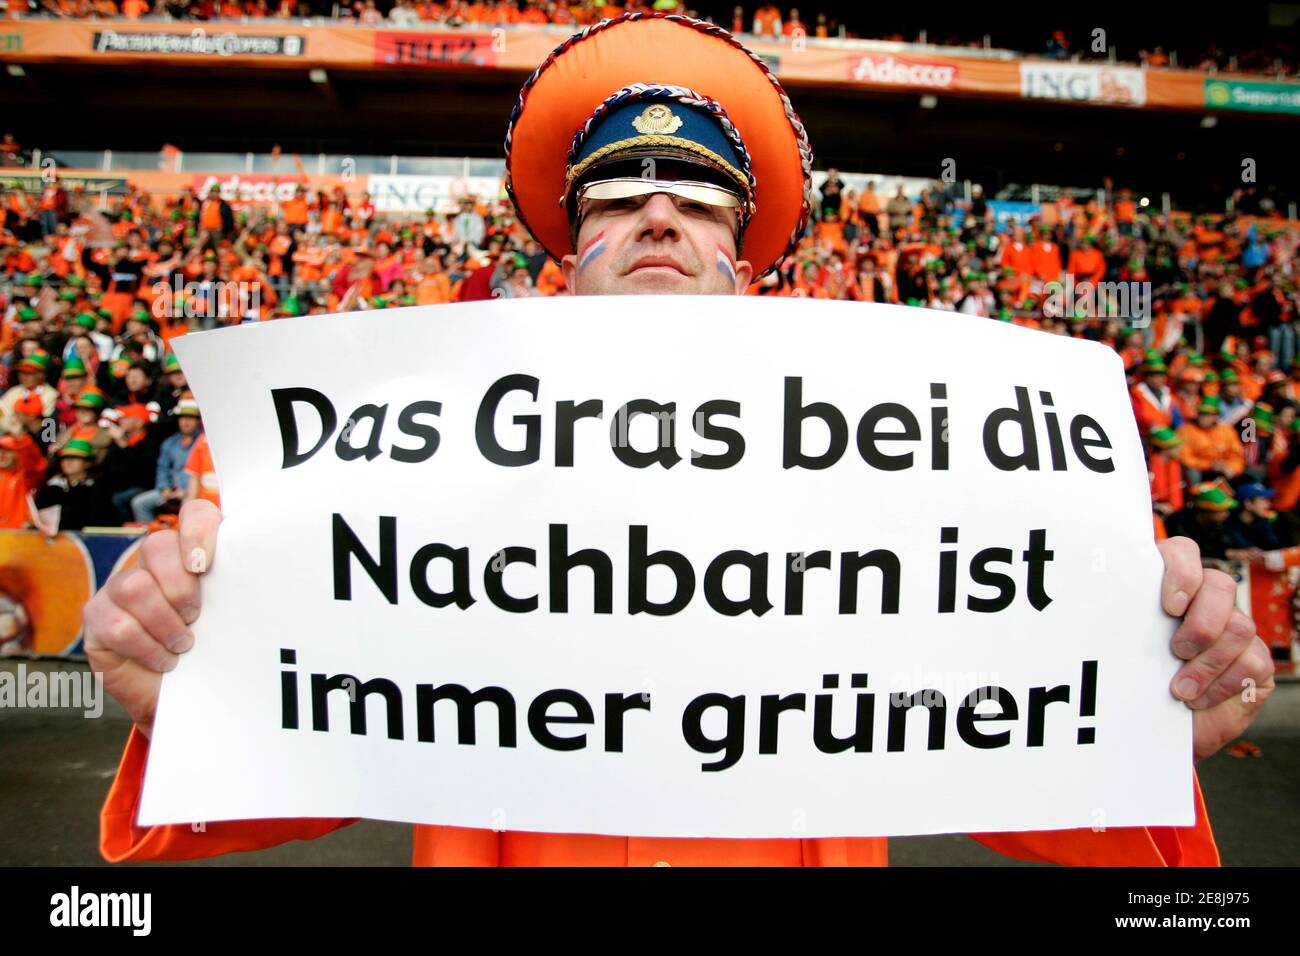 A Netherlands' supporter holds up a placard in Eindhoven June 1, 2006. The placard, which refers to the grass used in the German stadiums for the upcoming 2006 World Cup, reads, 'The grass at the neighbours is always more green'.   WORLD CUP 2006 PREVIEW       REUTERS/Jerry Lampen   (NETHERLANDS) Stock Photo